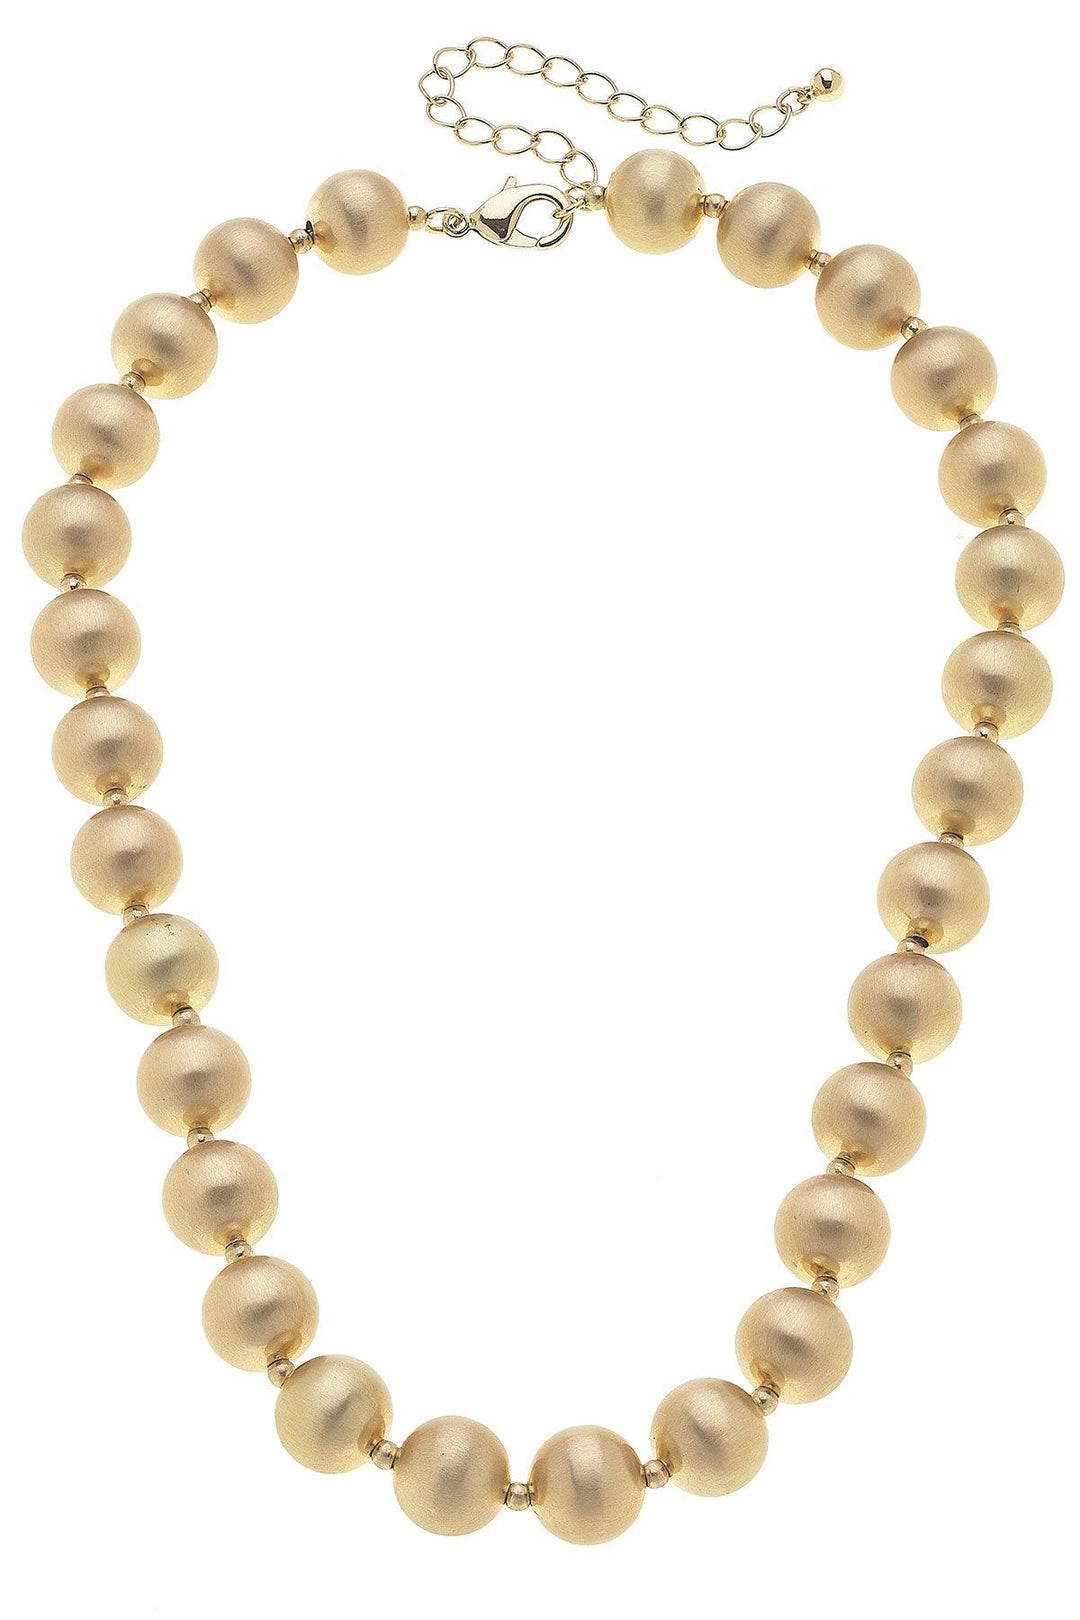 Phoebe gold ball necklace